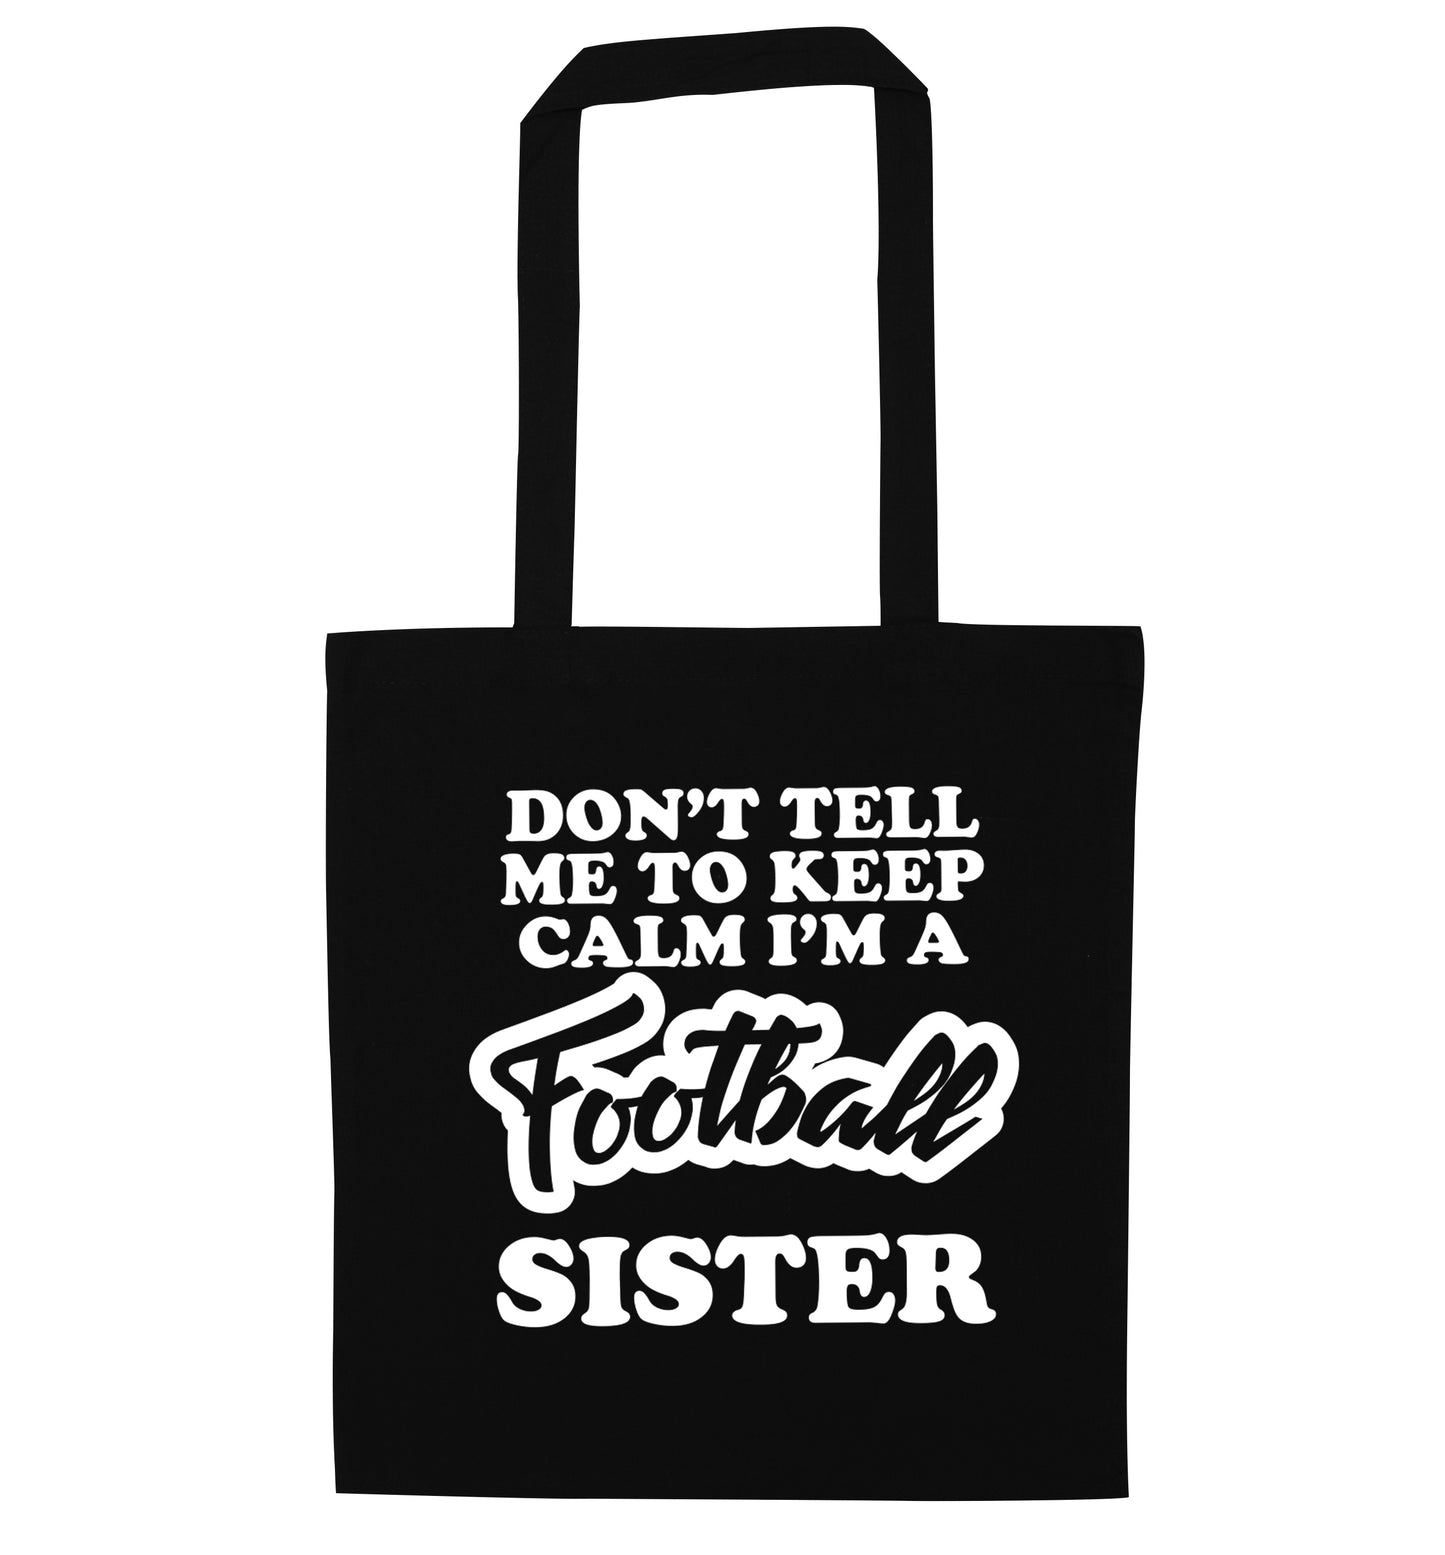 Don't tell me to keep calm I'm a football sister black tote bag